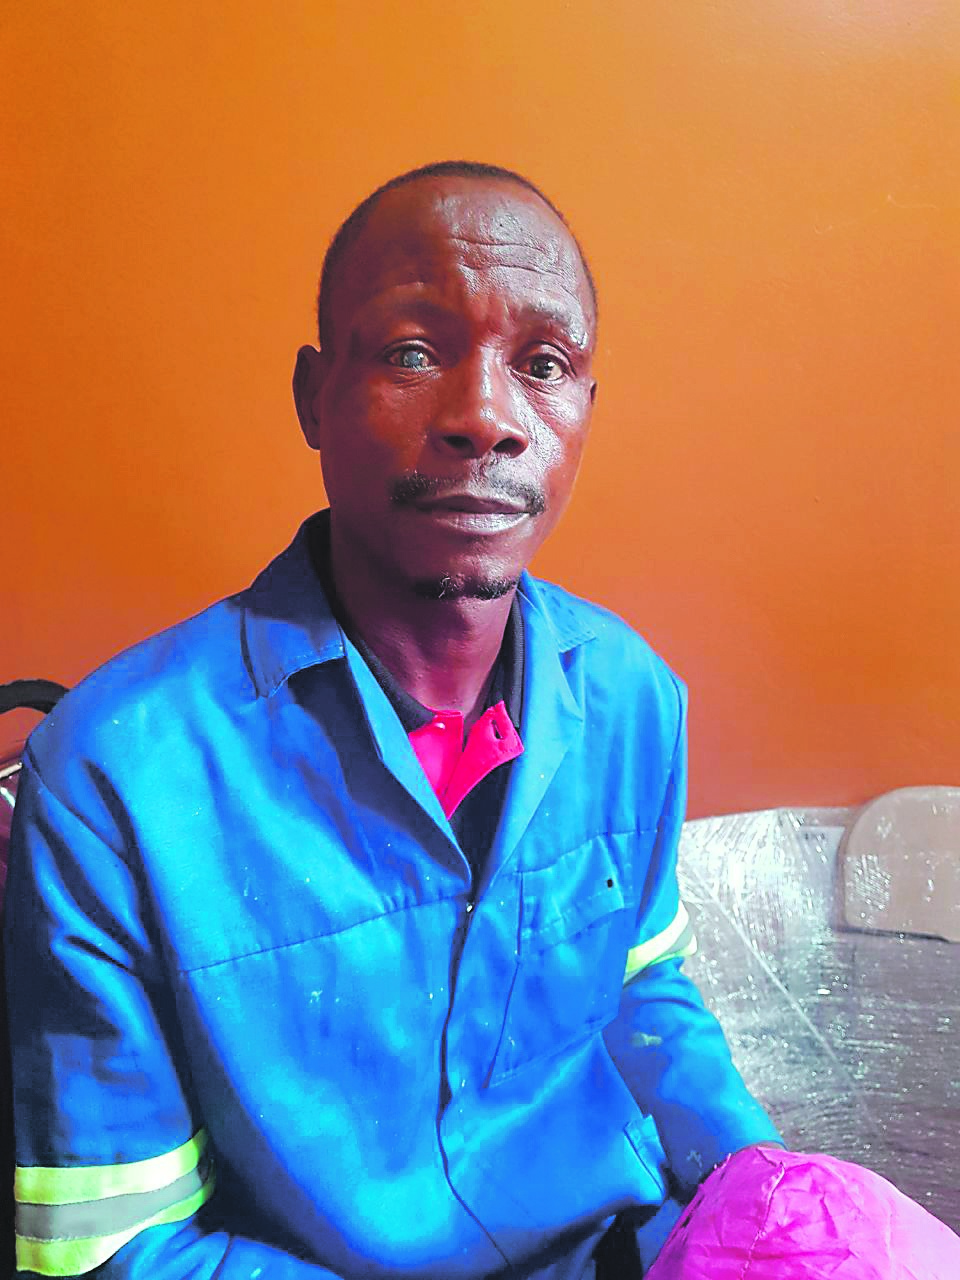 Rex Chabalala has been struggling to find employment because he is partially blind. Photo by Ntsako Mabunda